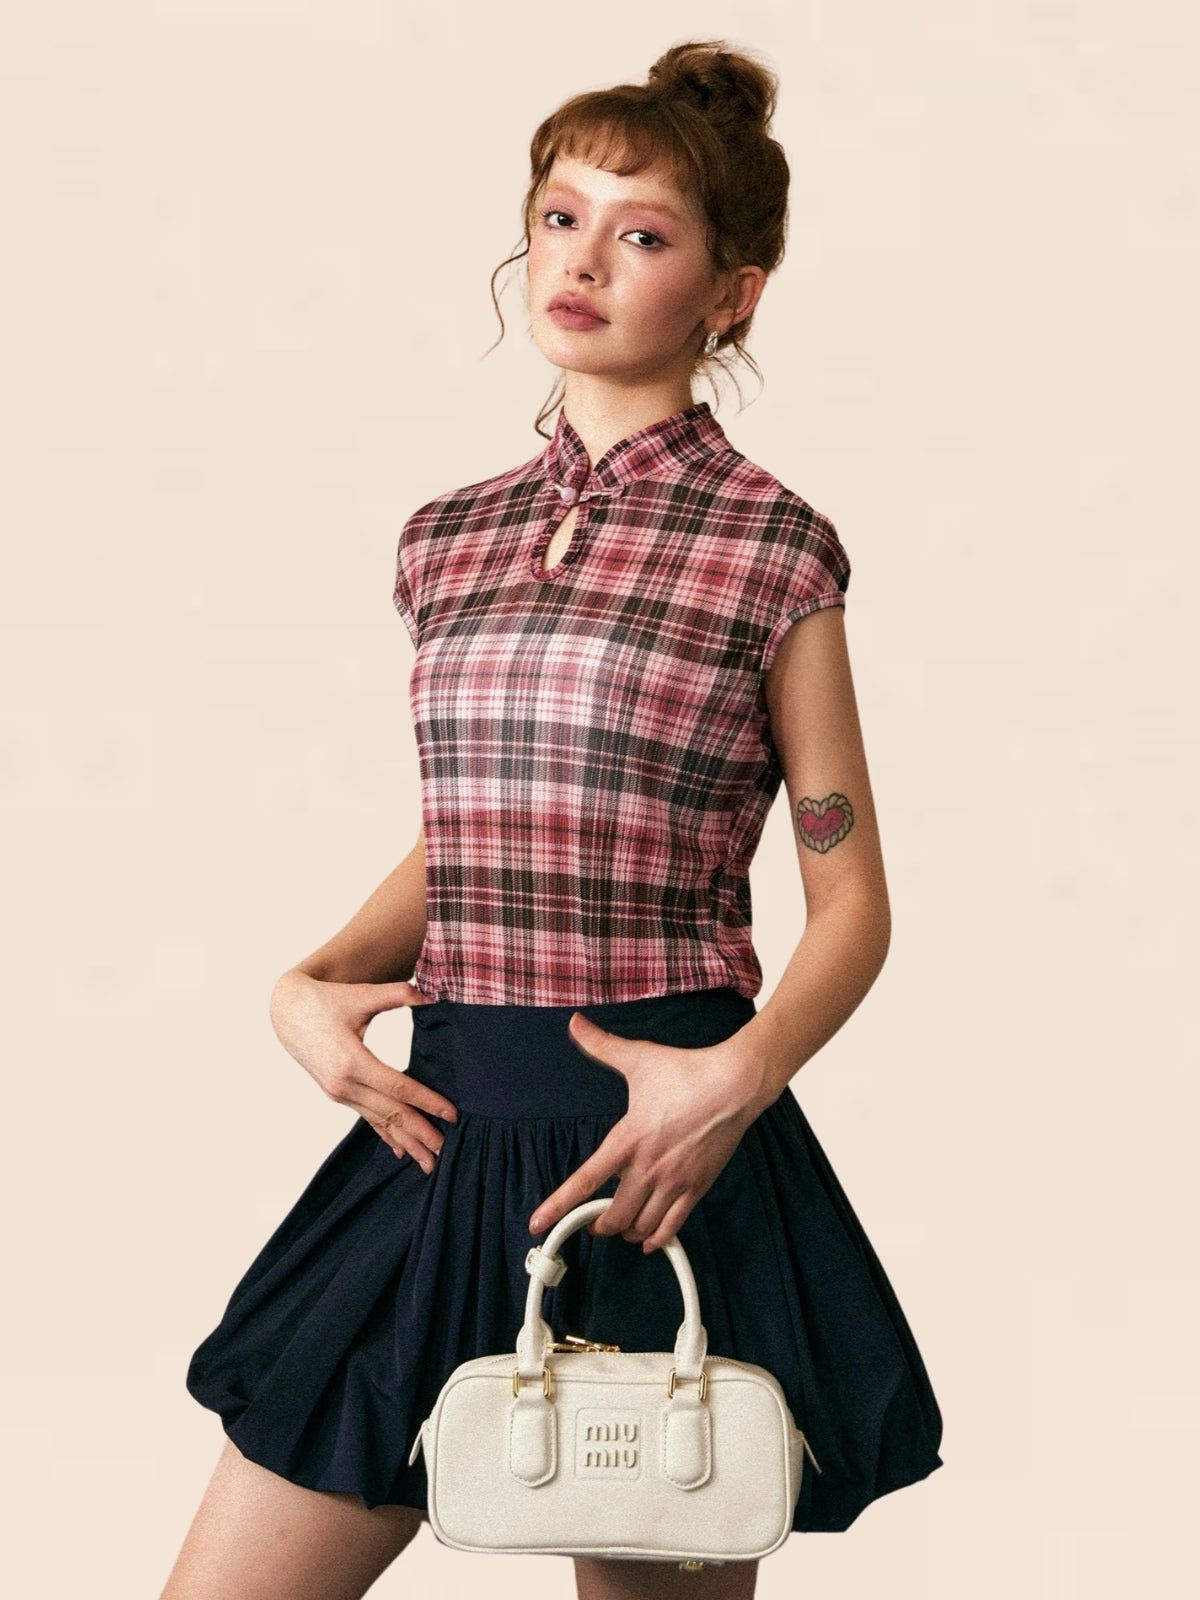 Chinese Buckle Plaid T-Shirt